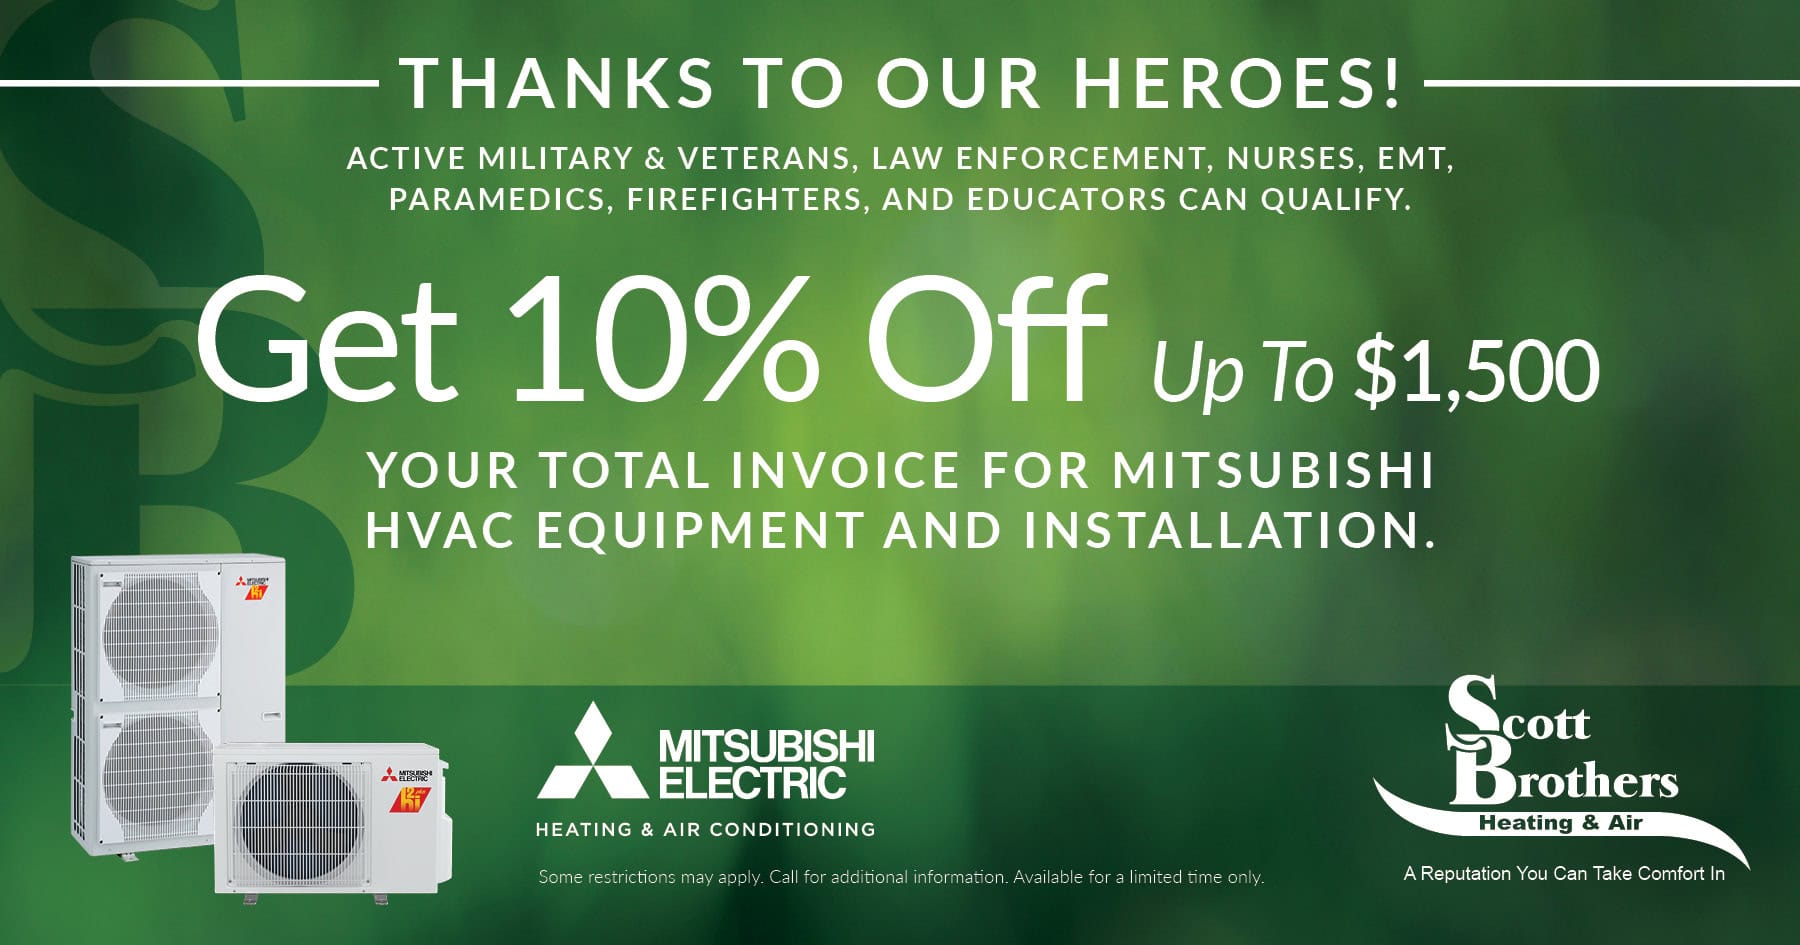 Thanks to our heroes! Active military and veterans, law enforcement, nurses, EMT, paramedics, firefighters, and educators can qualify. Get 10% off up to ,500 your total invoice for Mitsubishi HVAC equipment and installation. Some restrictions may apply. Call for additional information. Available for a limited only.